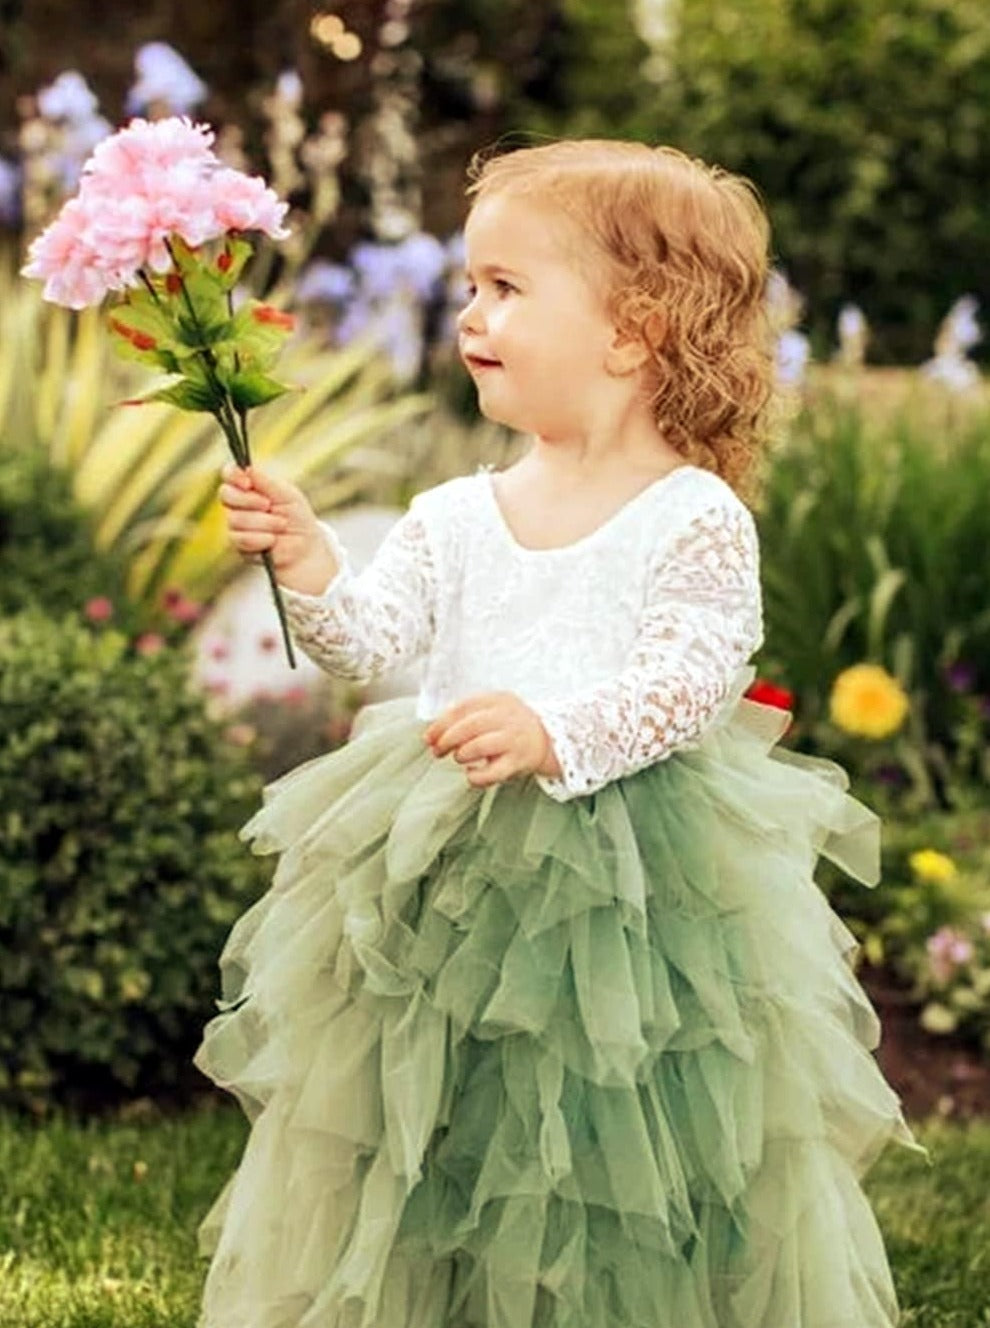 2Bunnies Flower Girl Dress Peony Lace Back A-Line Long Sleeve Tiered Tulle Maxi (Sage) - 2BUNNIES